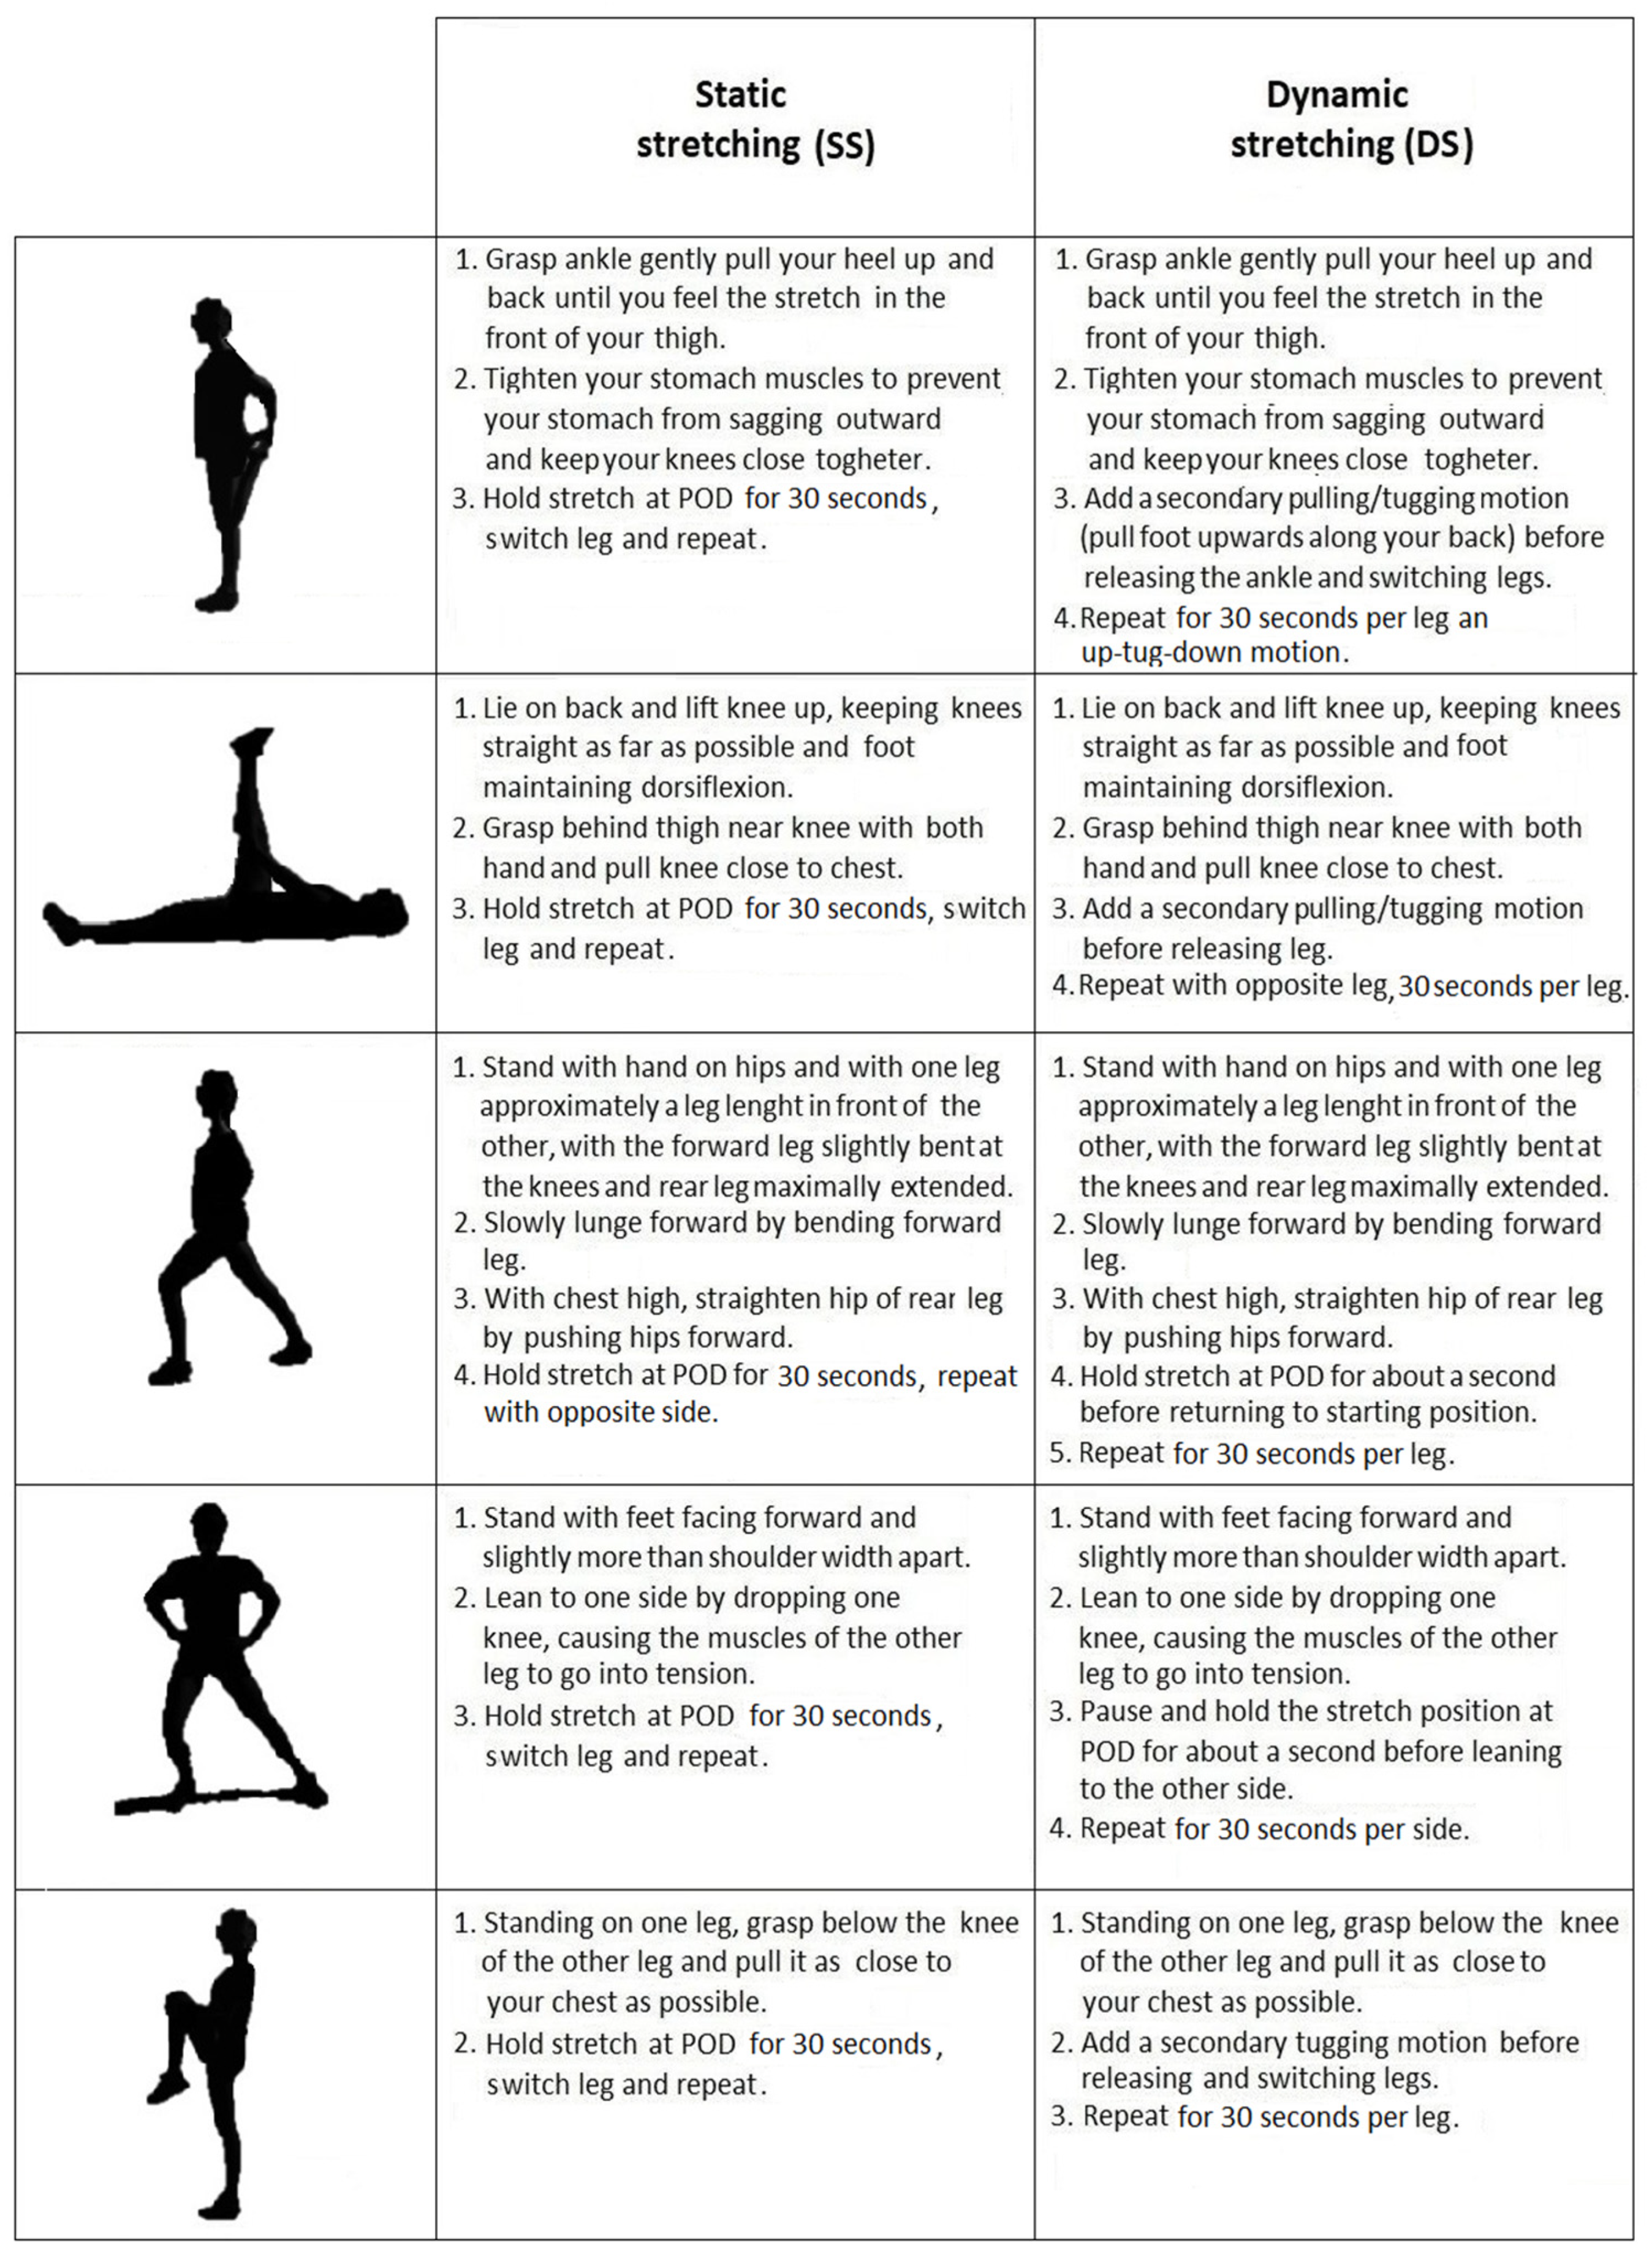 Warm-Ups Before Exercise: Many Methods, Little Research - The New